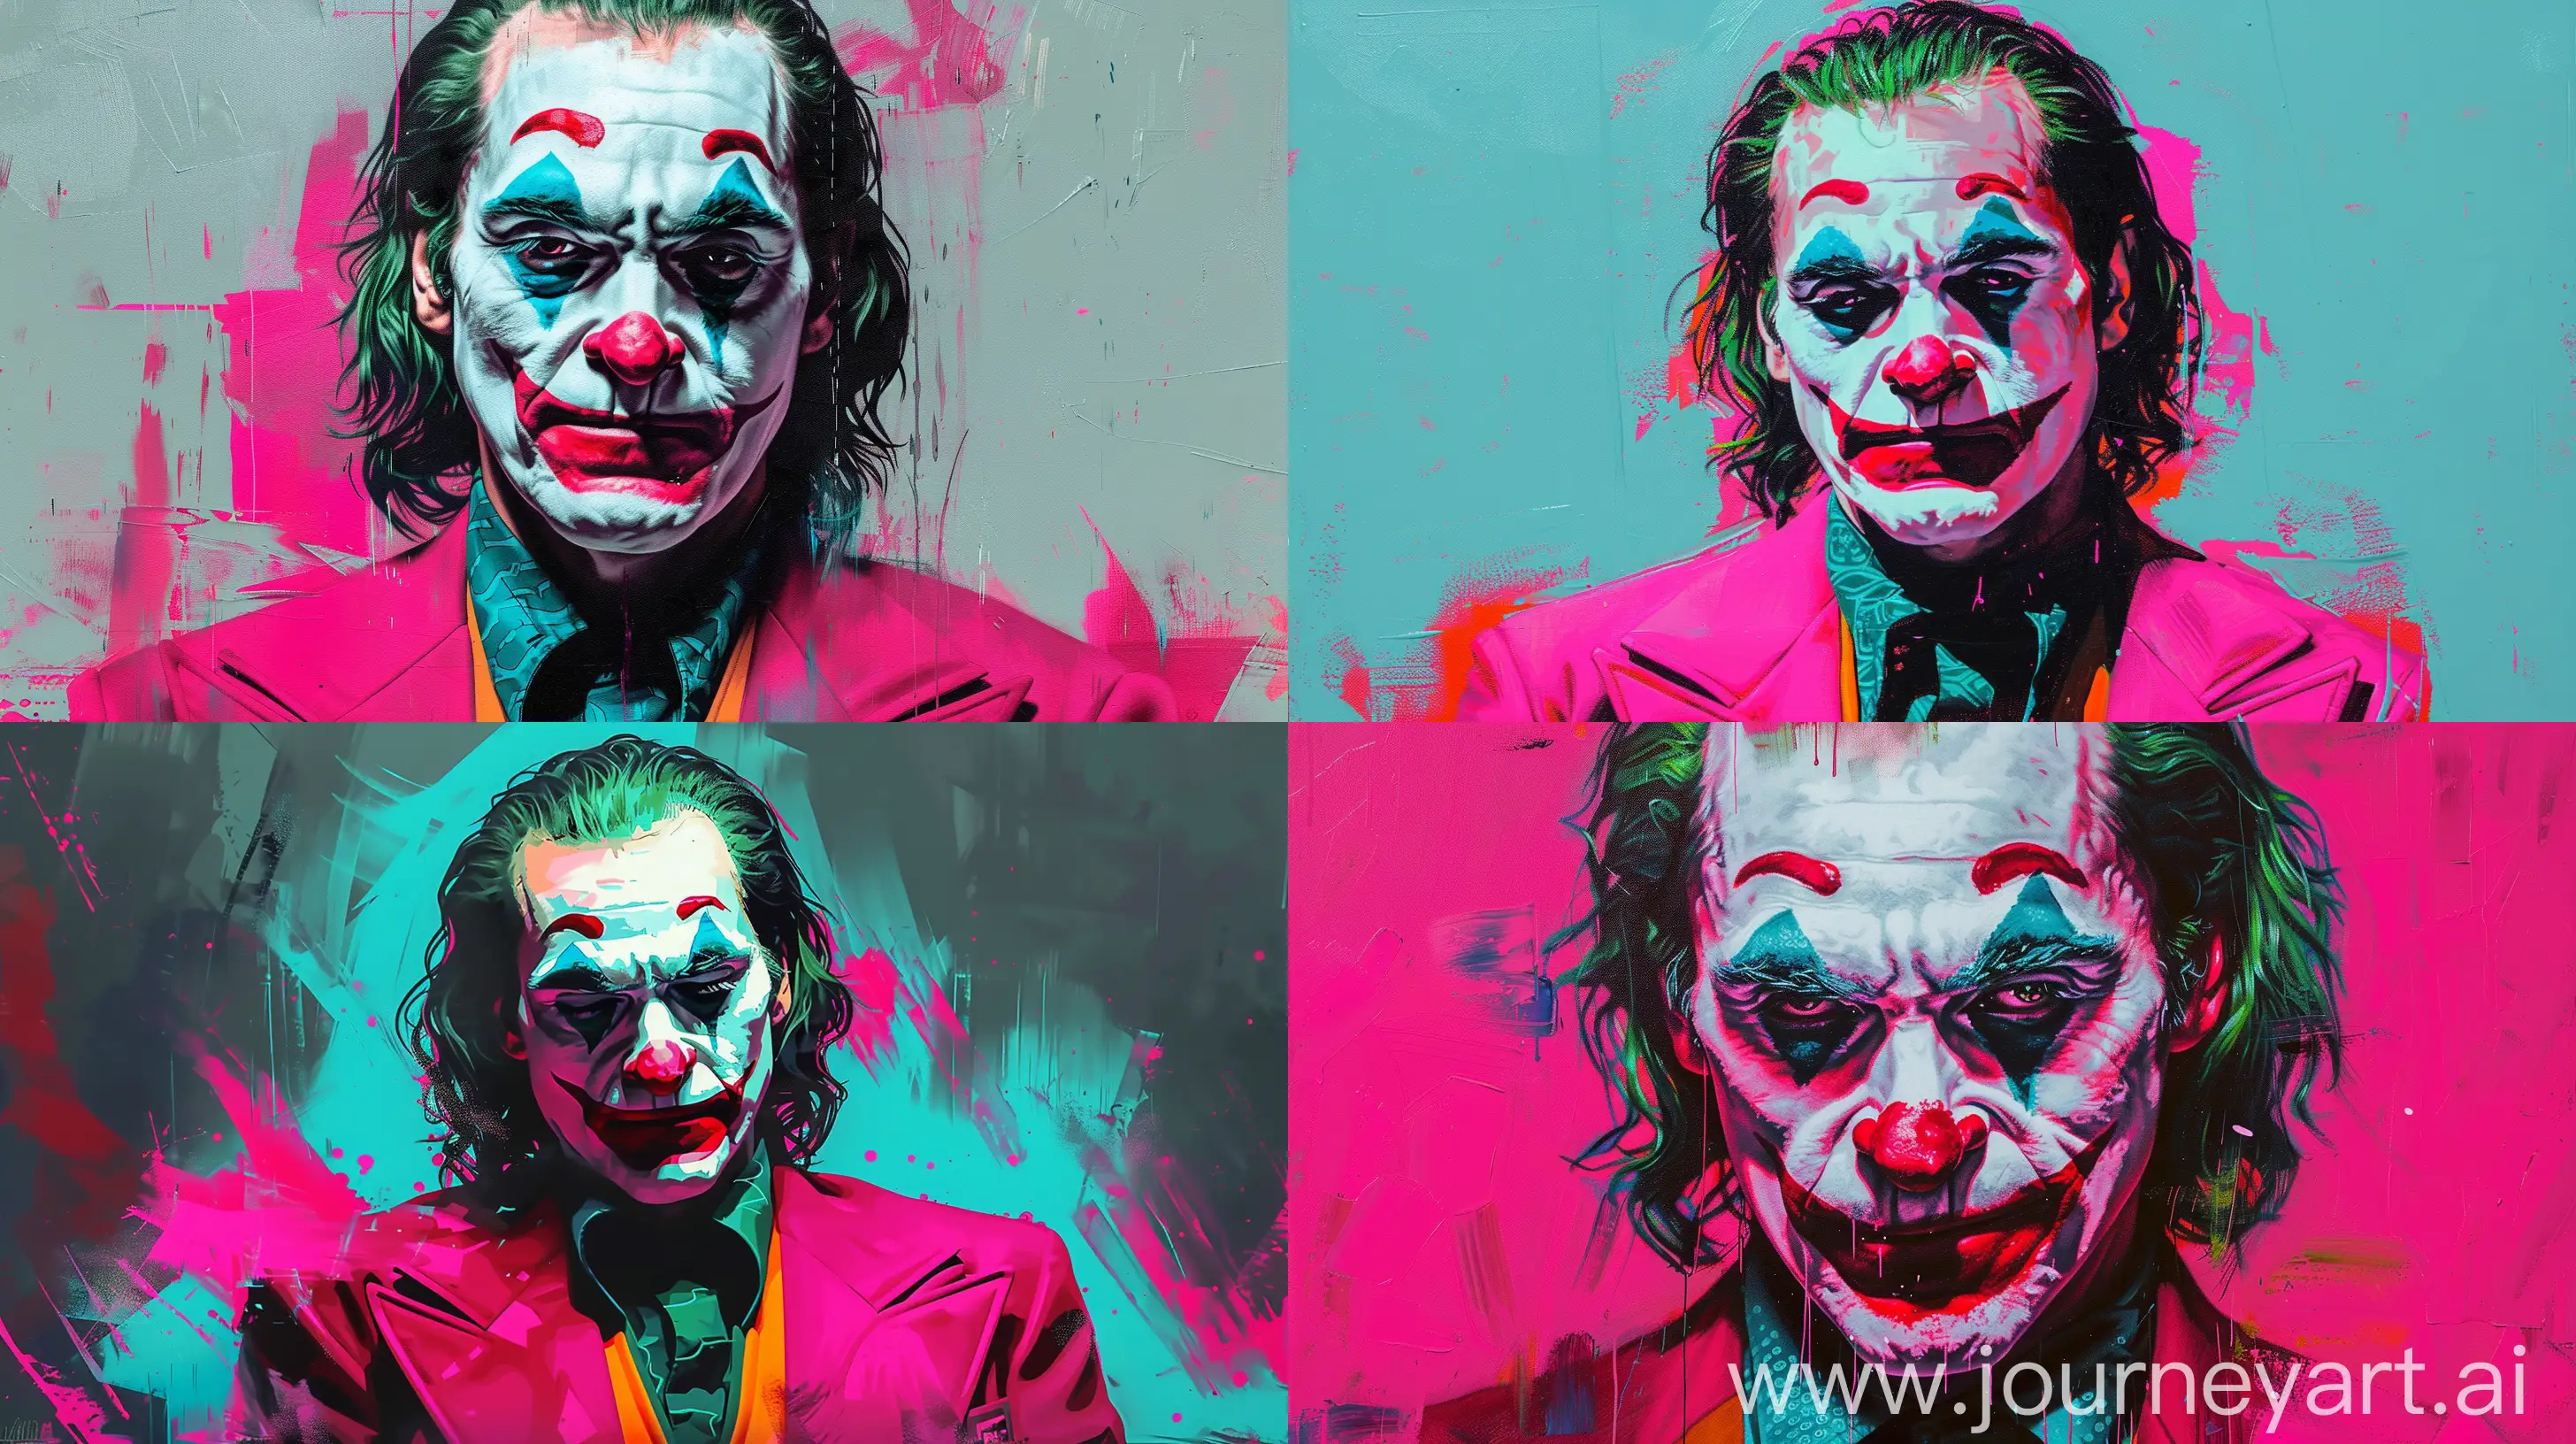 Joaquin-Phoenix-as-Joker-in-Star-WarsInspired-Oil-Painting-with-Bright-Pink-and-Cyan-Palette